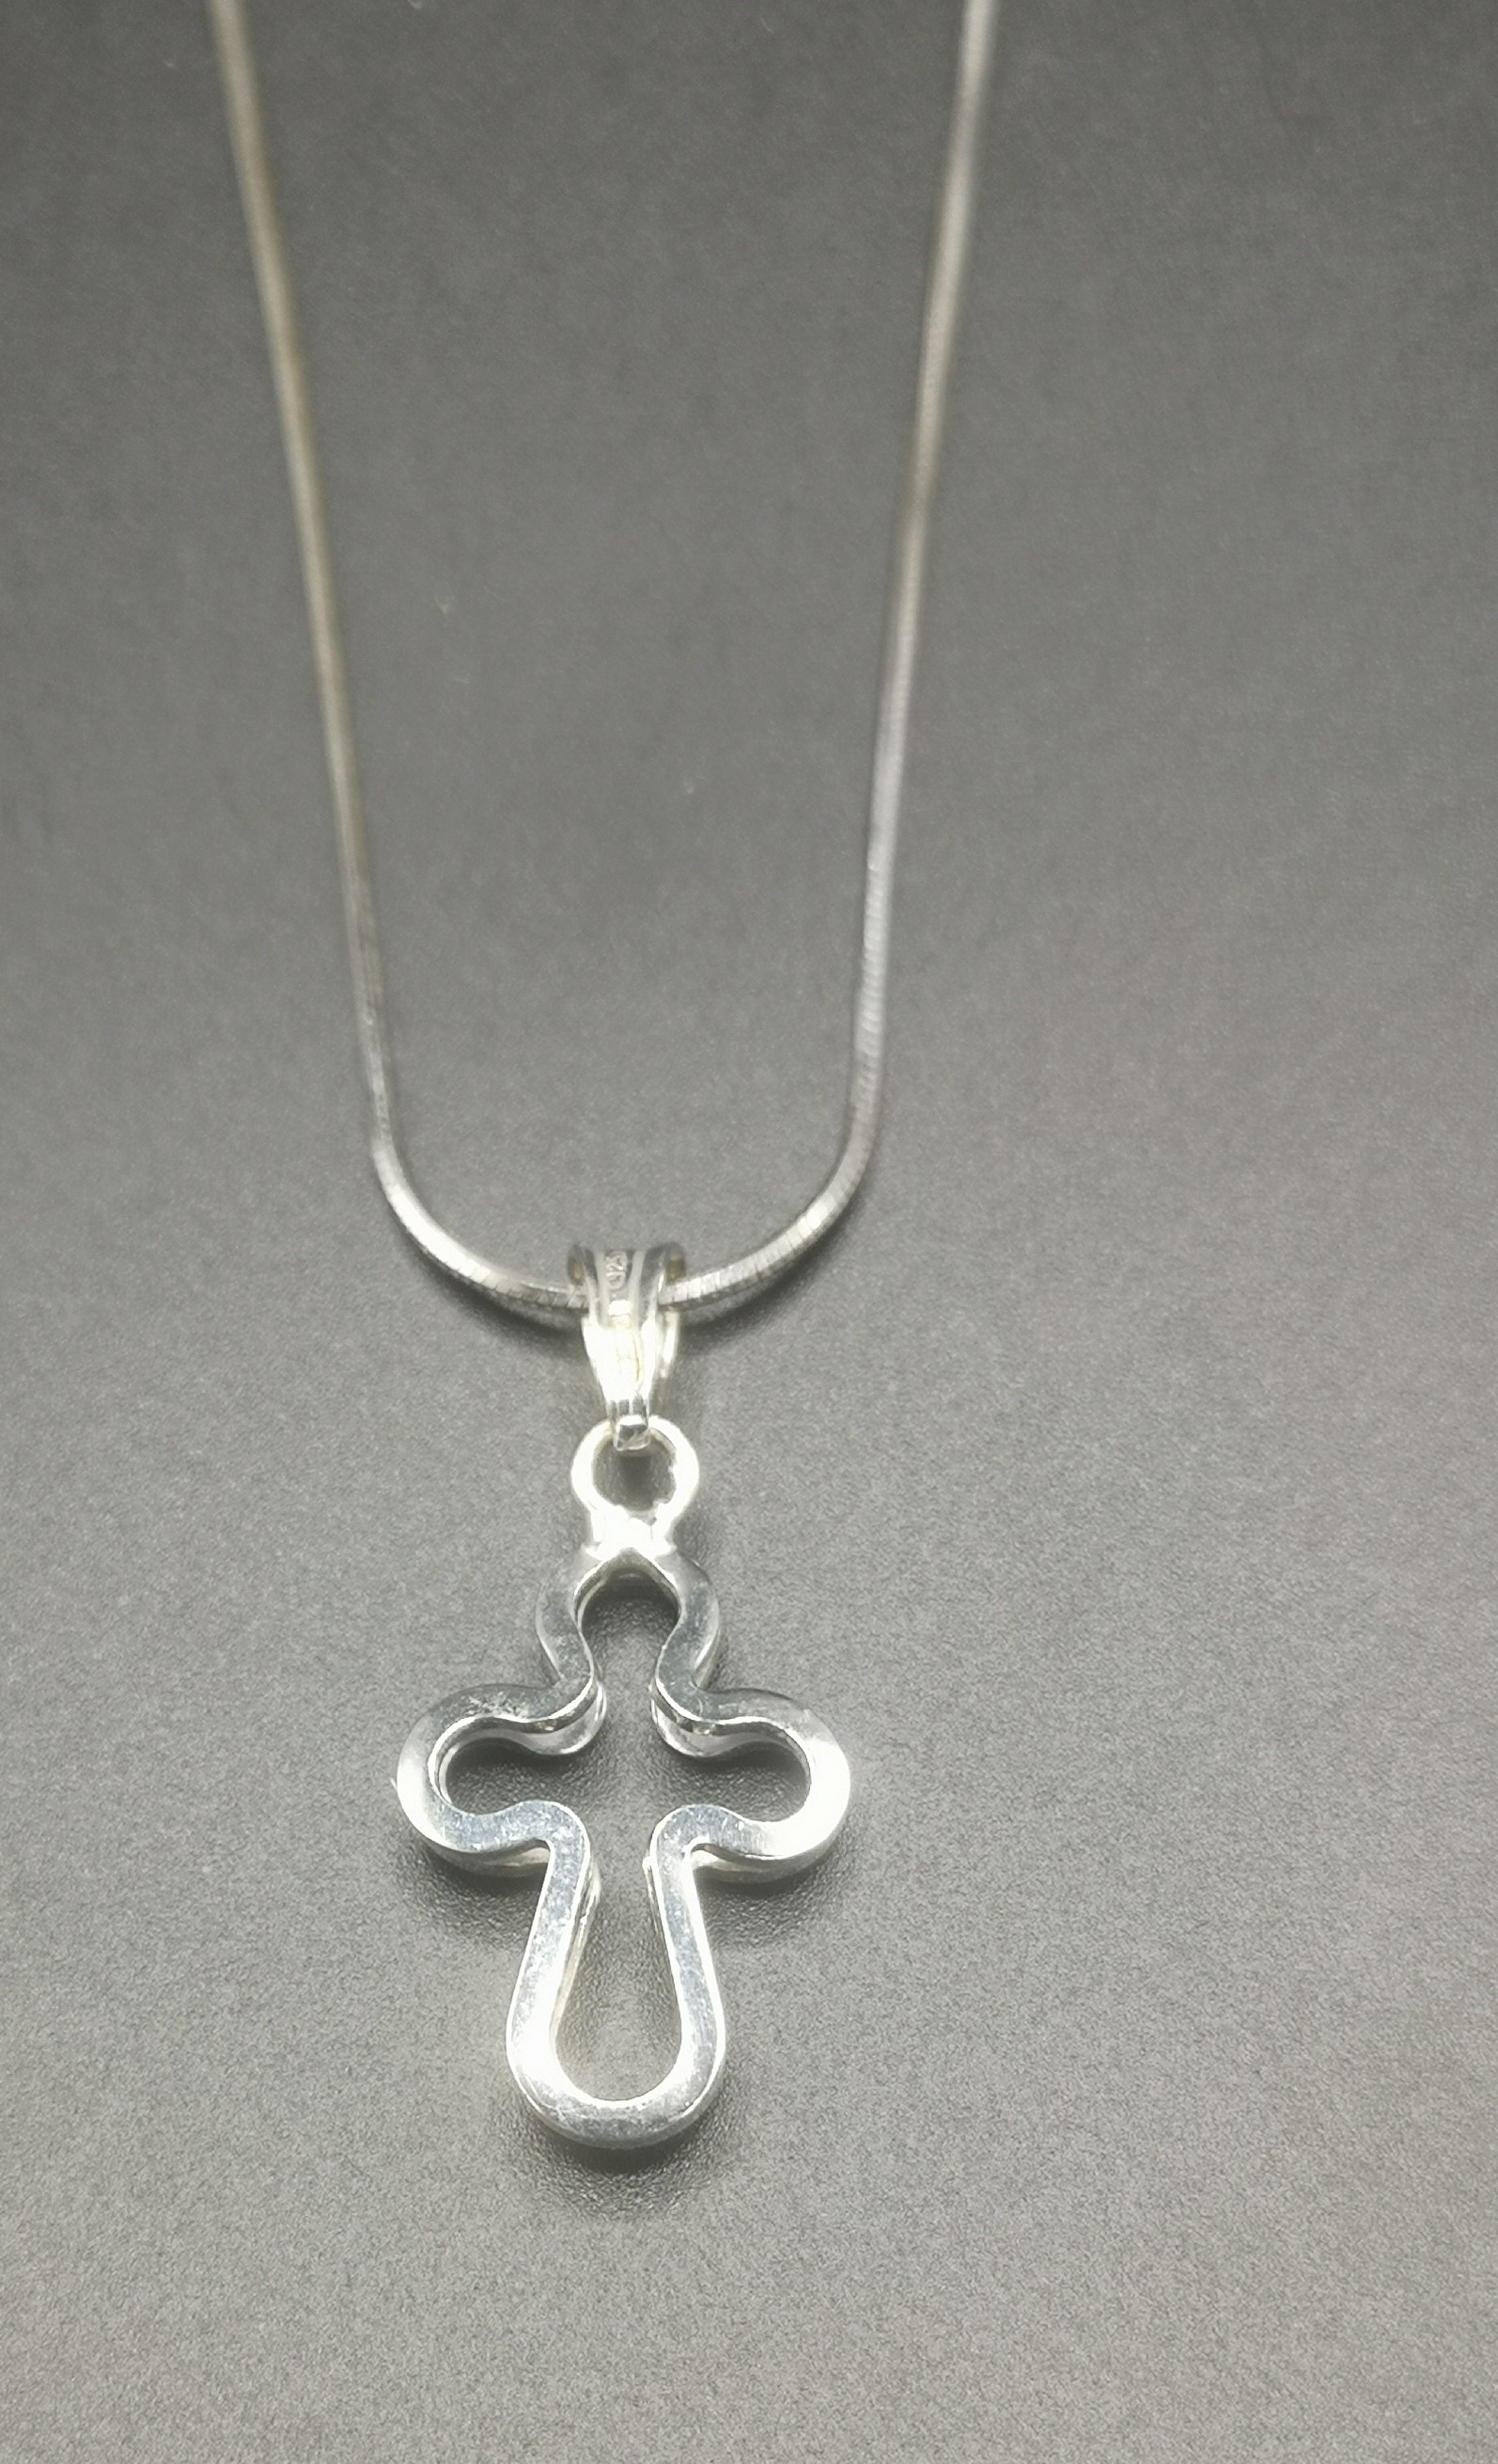 Silver necklace with cross pendant - Image 2 of 3